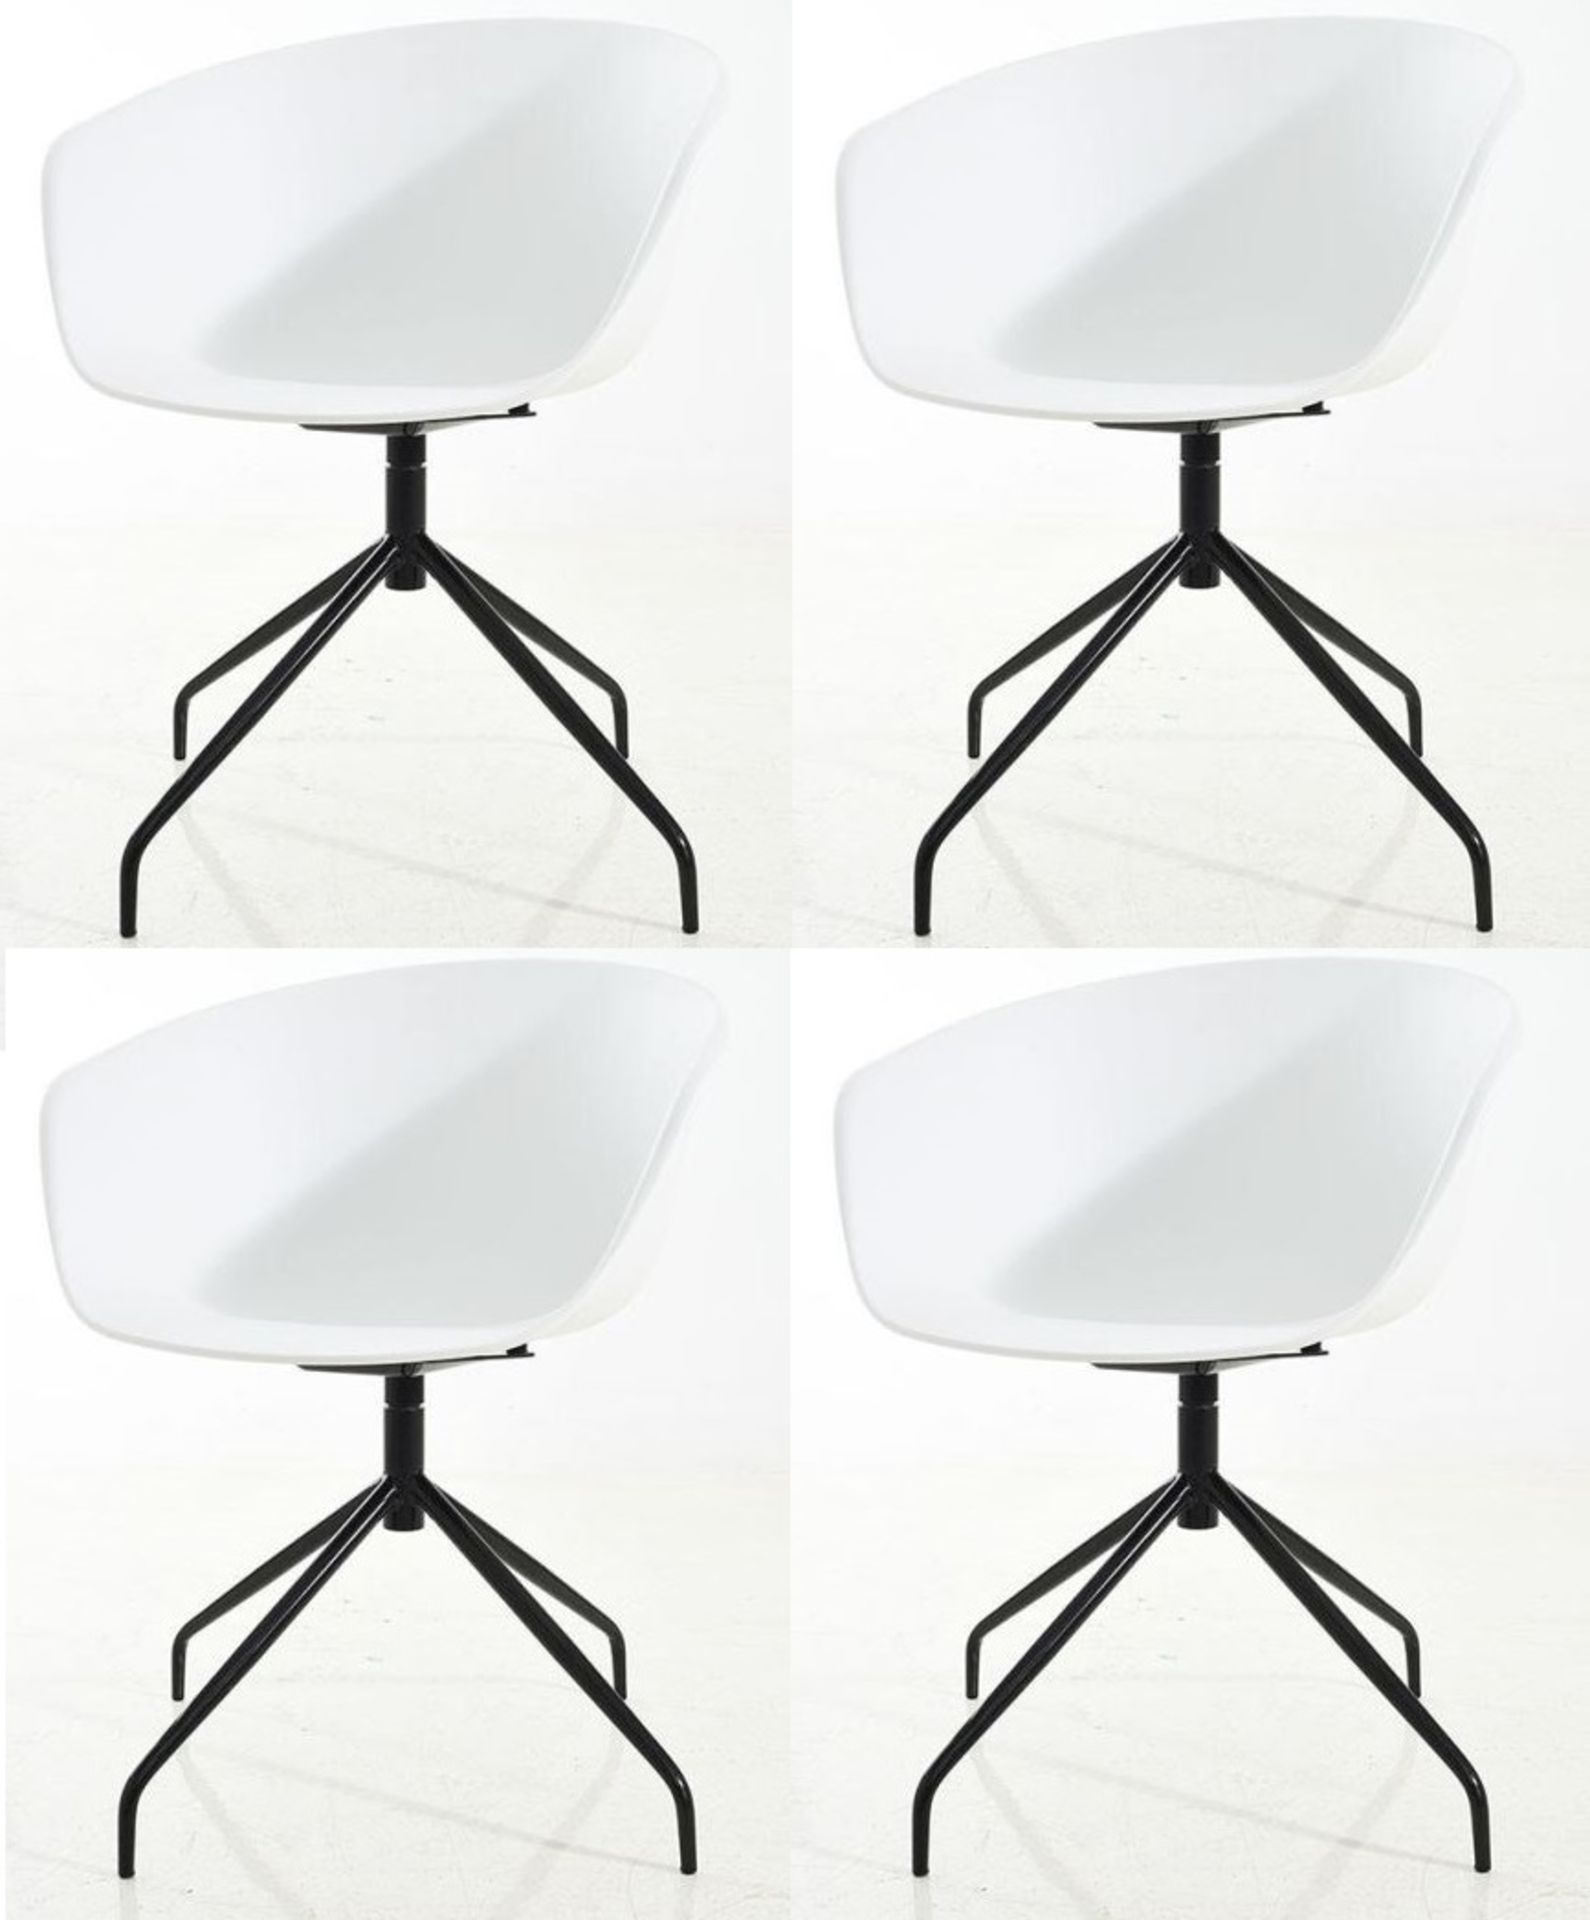 A Set Of 4 x Elegant Dining Chairs With White Curved Seats And Black Metal Bases